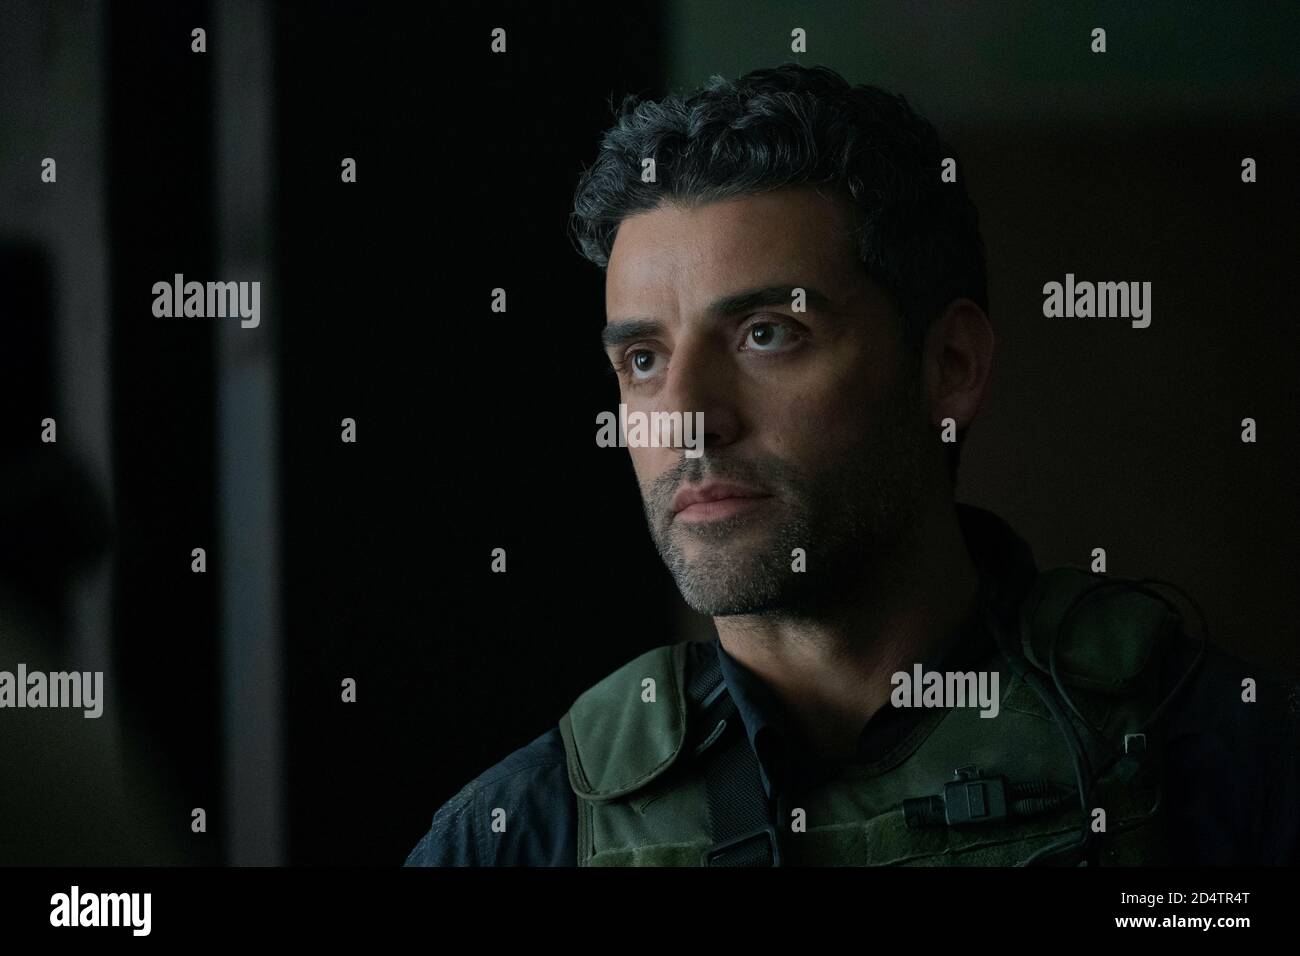 OSCAR ISAAC in TRIPLE FRONTIER (2019), directed by J. C. CHANDOR. Credit: ACQUIRE TALENT AGENCY/ATLAS ENTERTAINMENT / Album Stock Photo